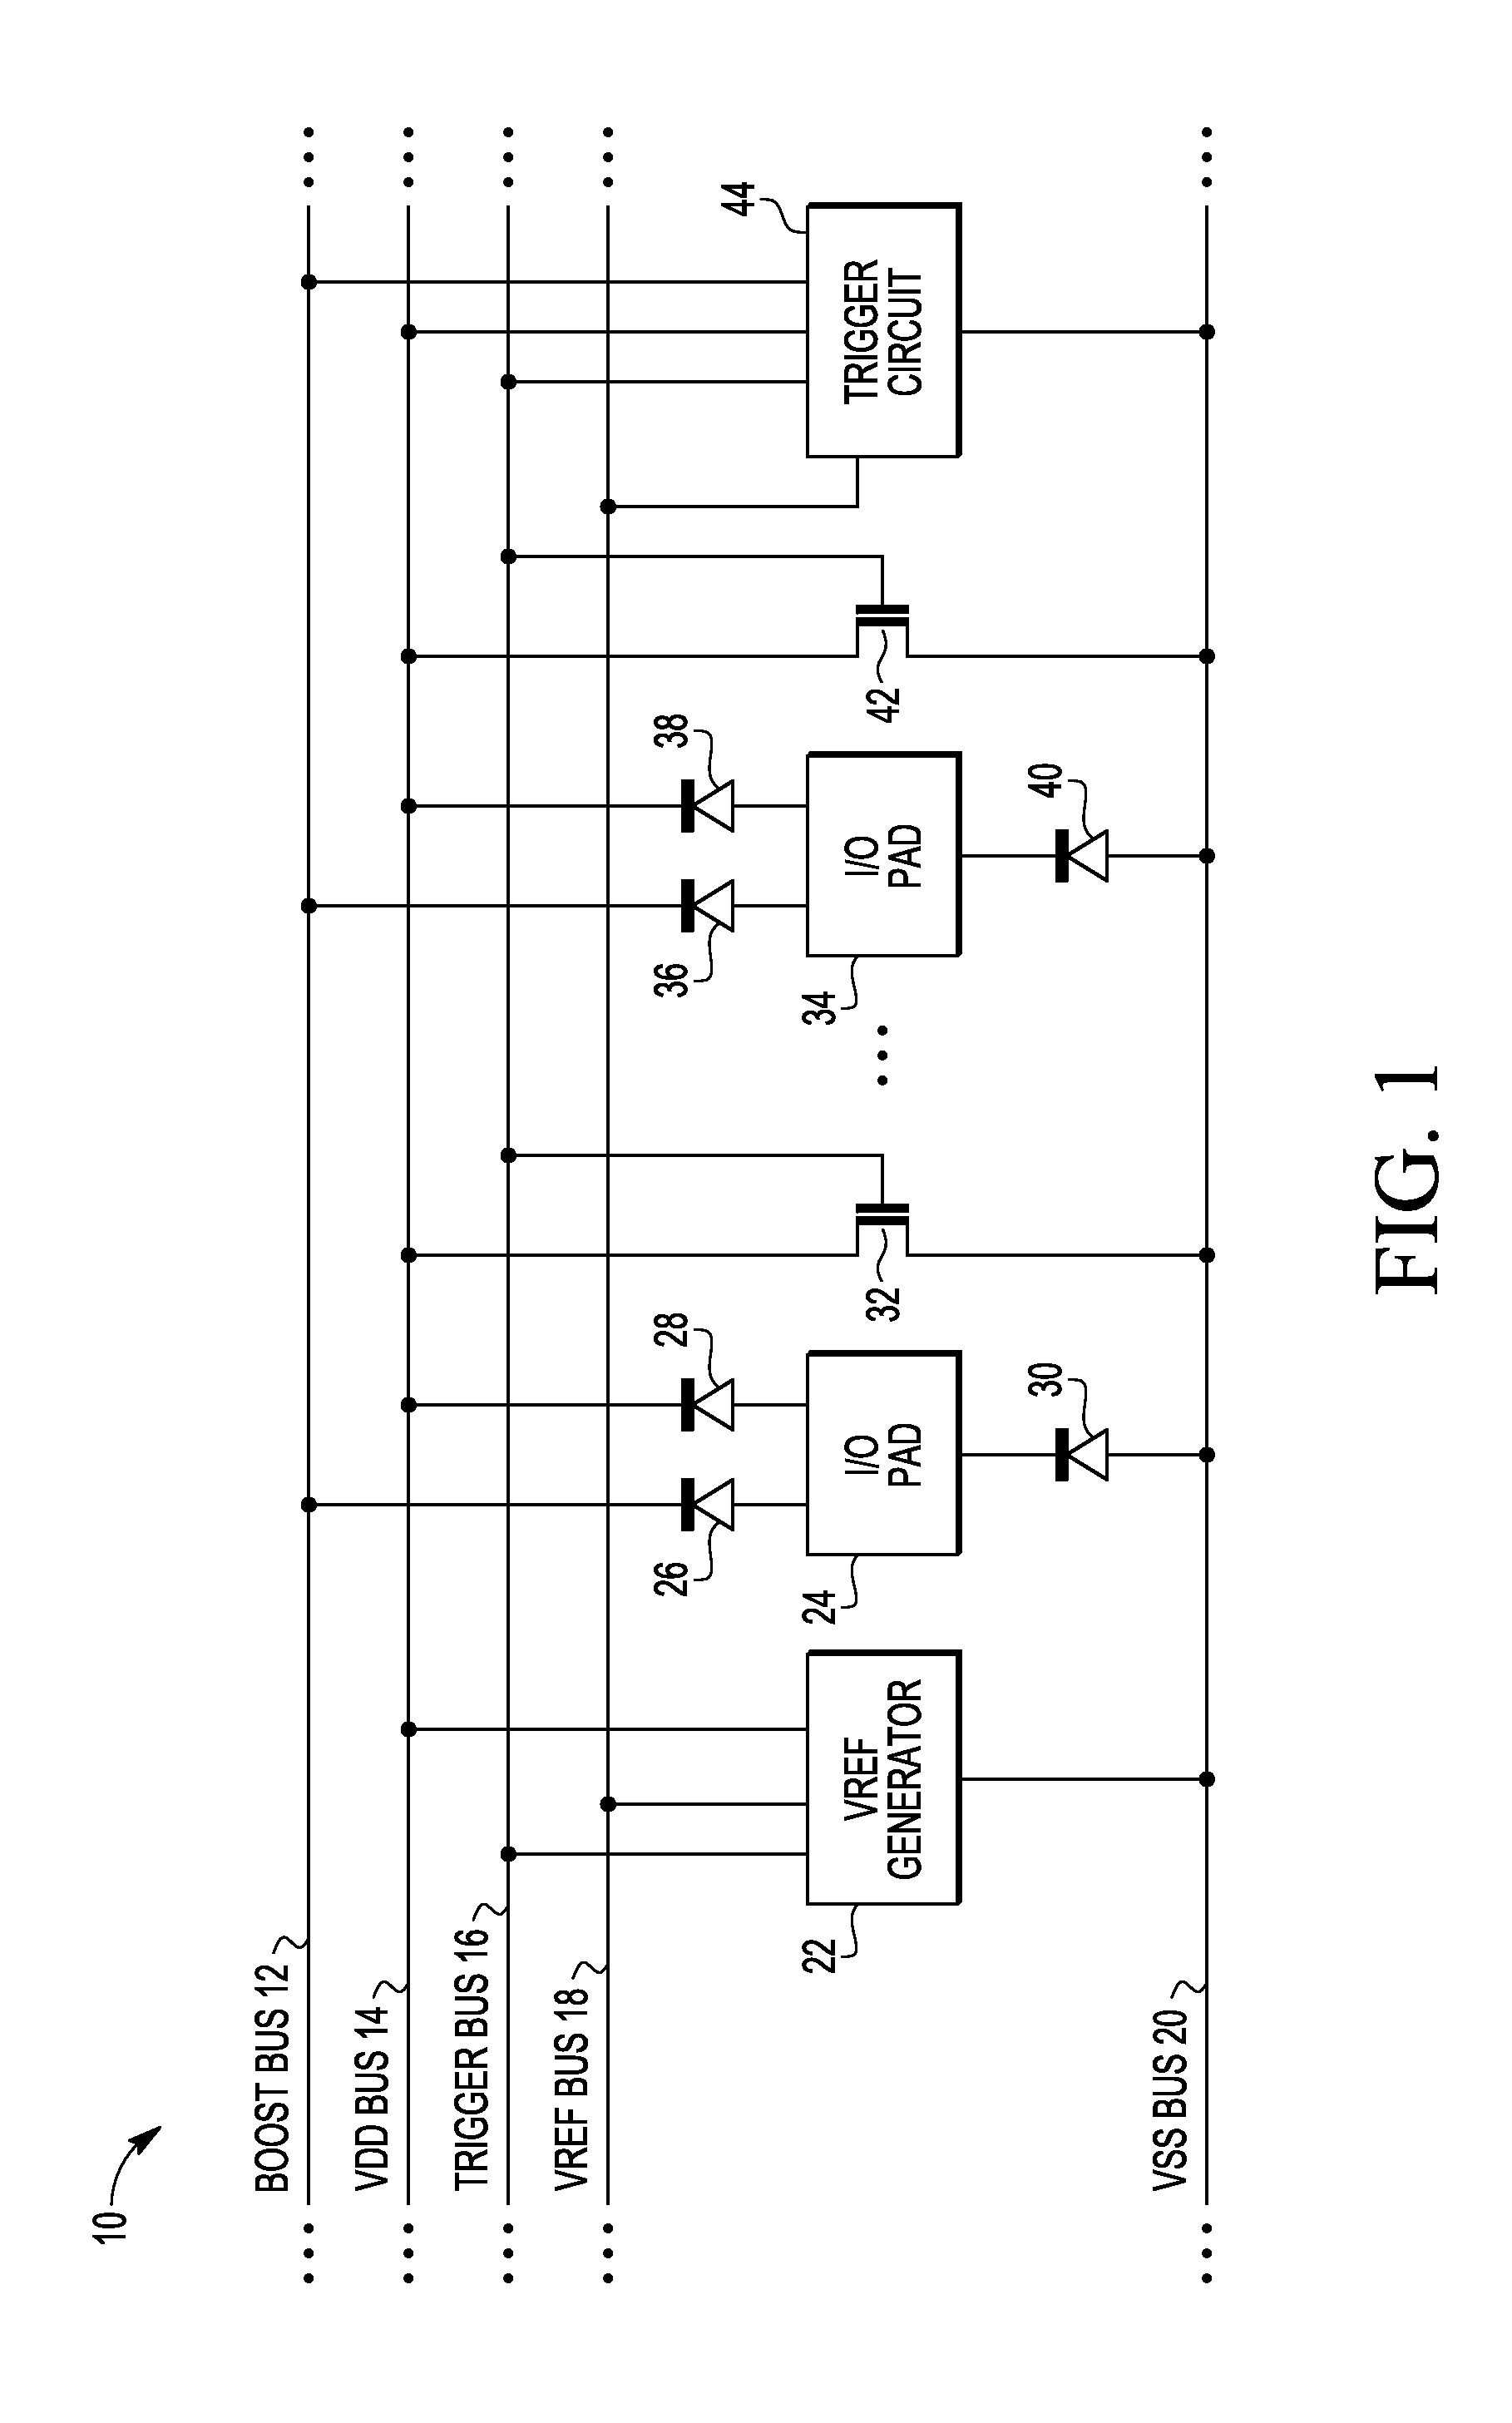 Overvoltage protection circuit for an integrated circuit